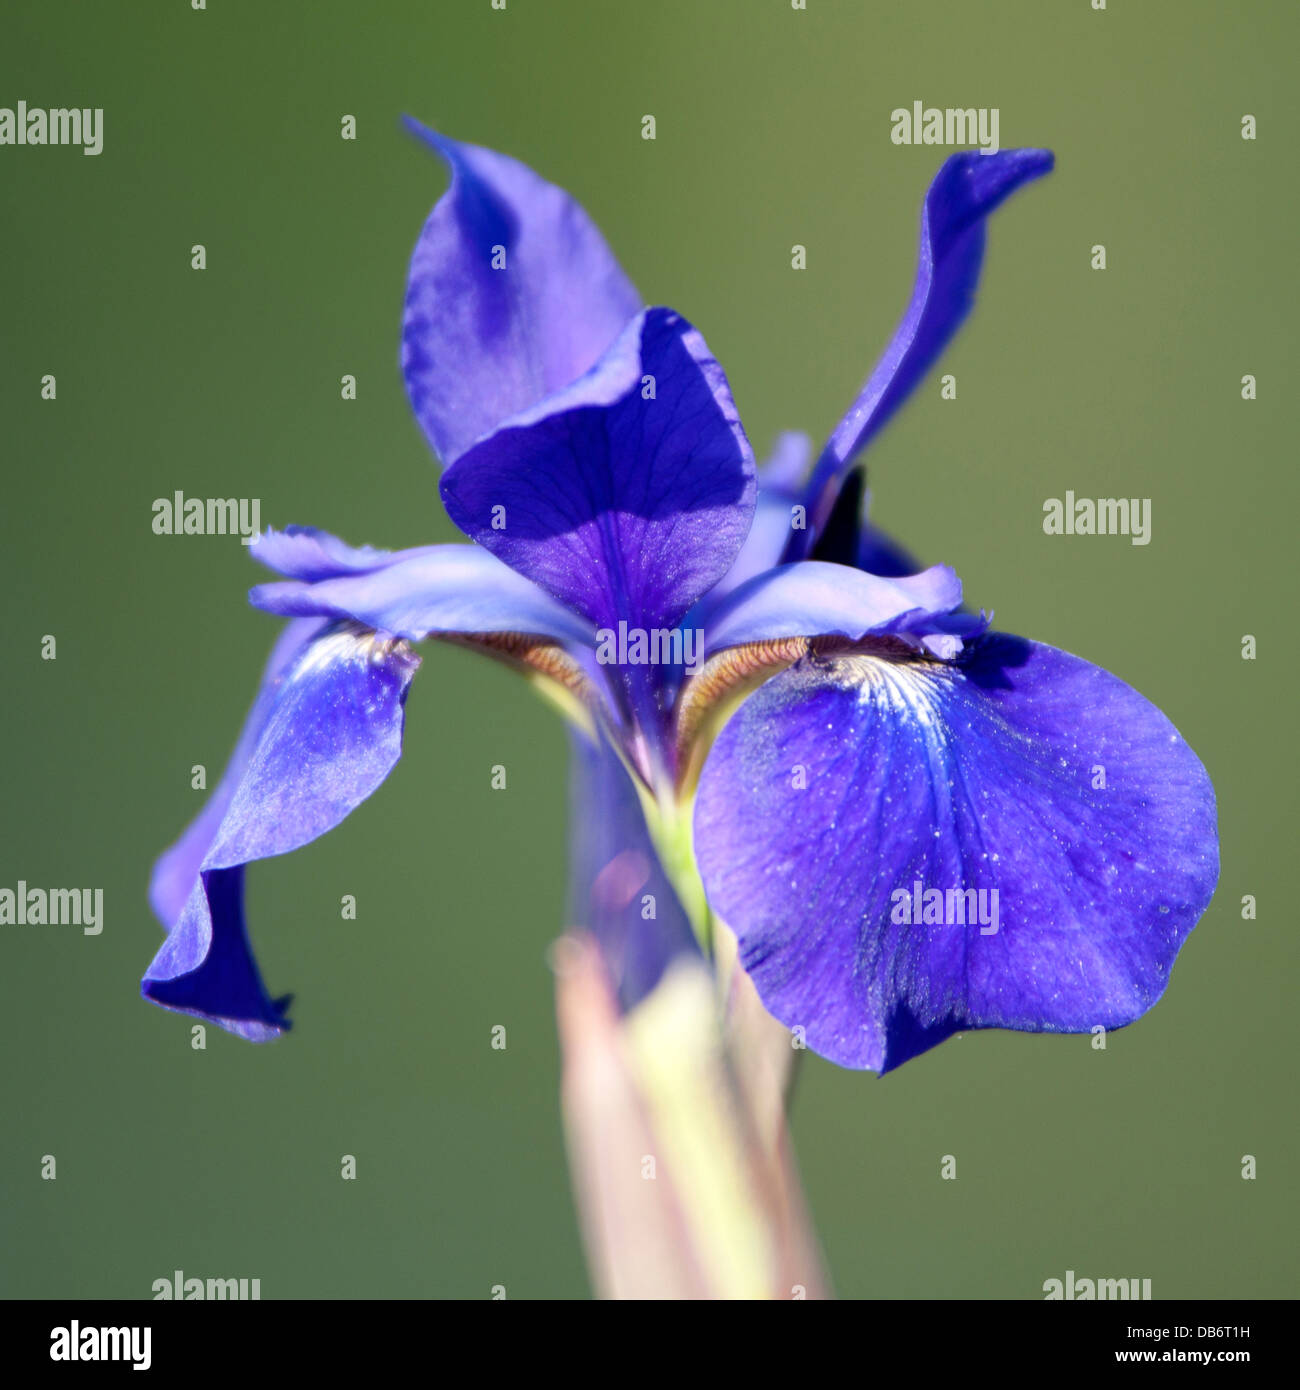 Close-up photograph of a purple iris flower against a green background. Stock Photo